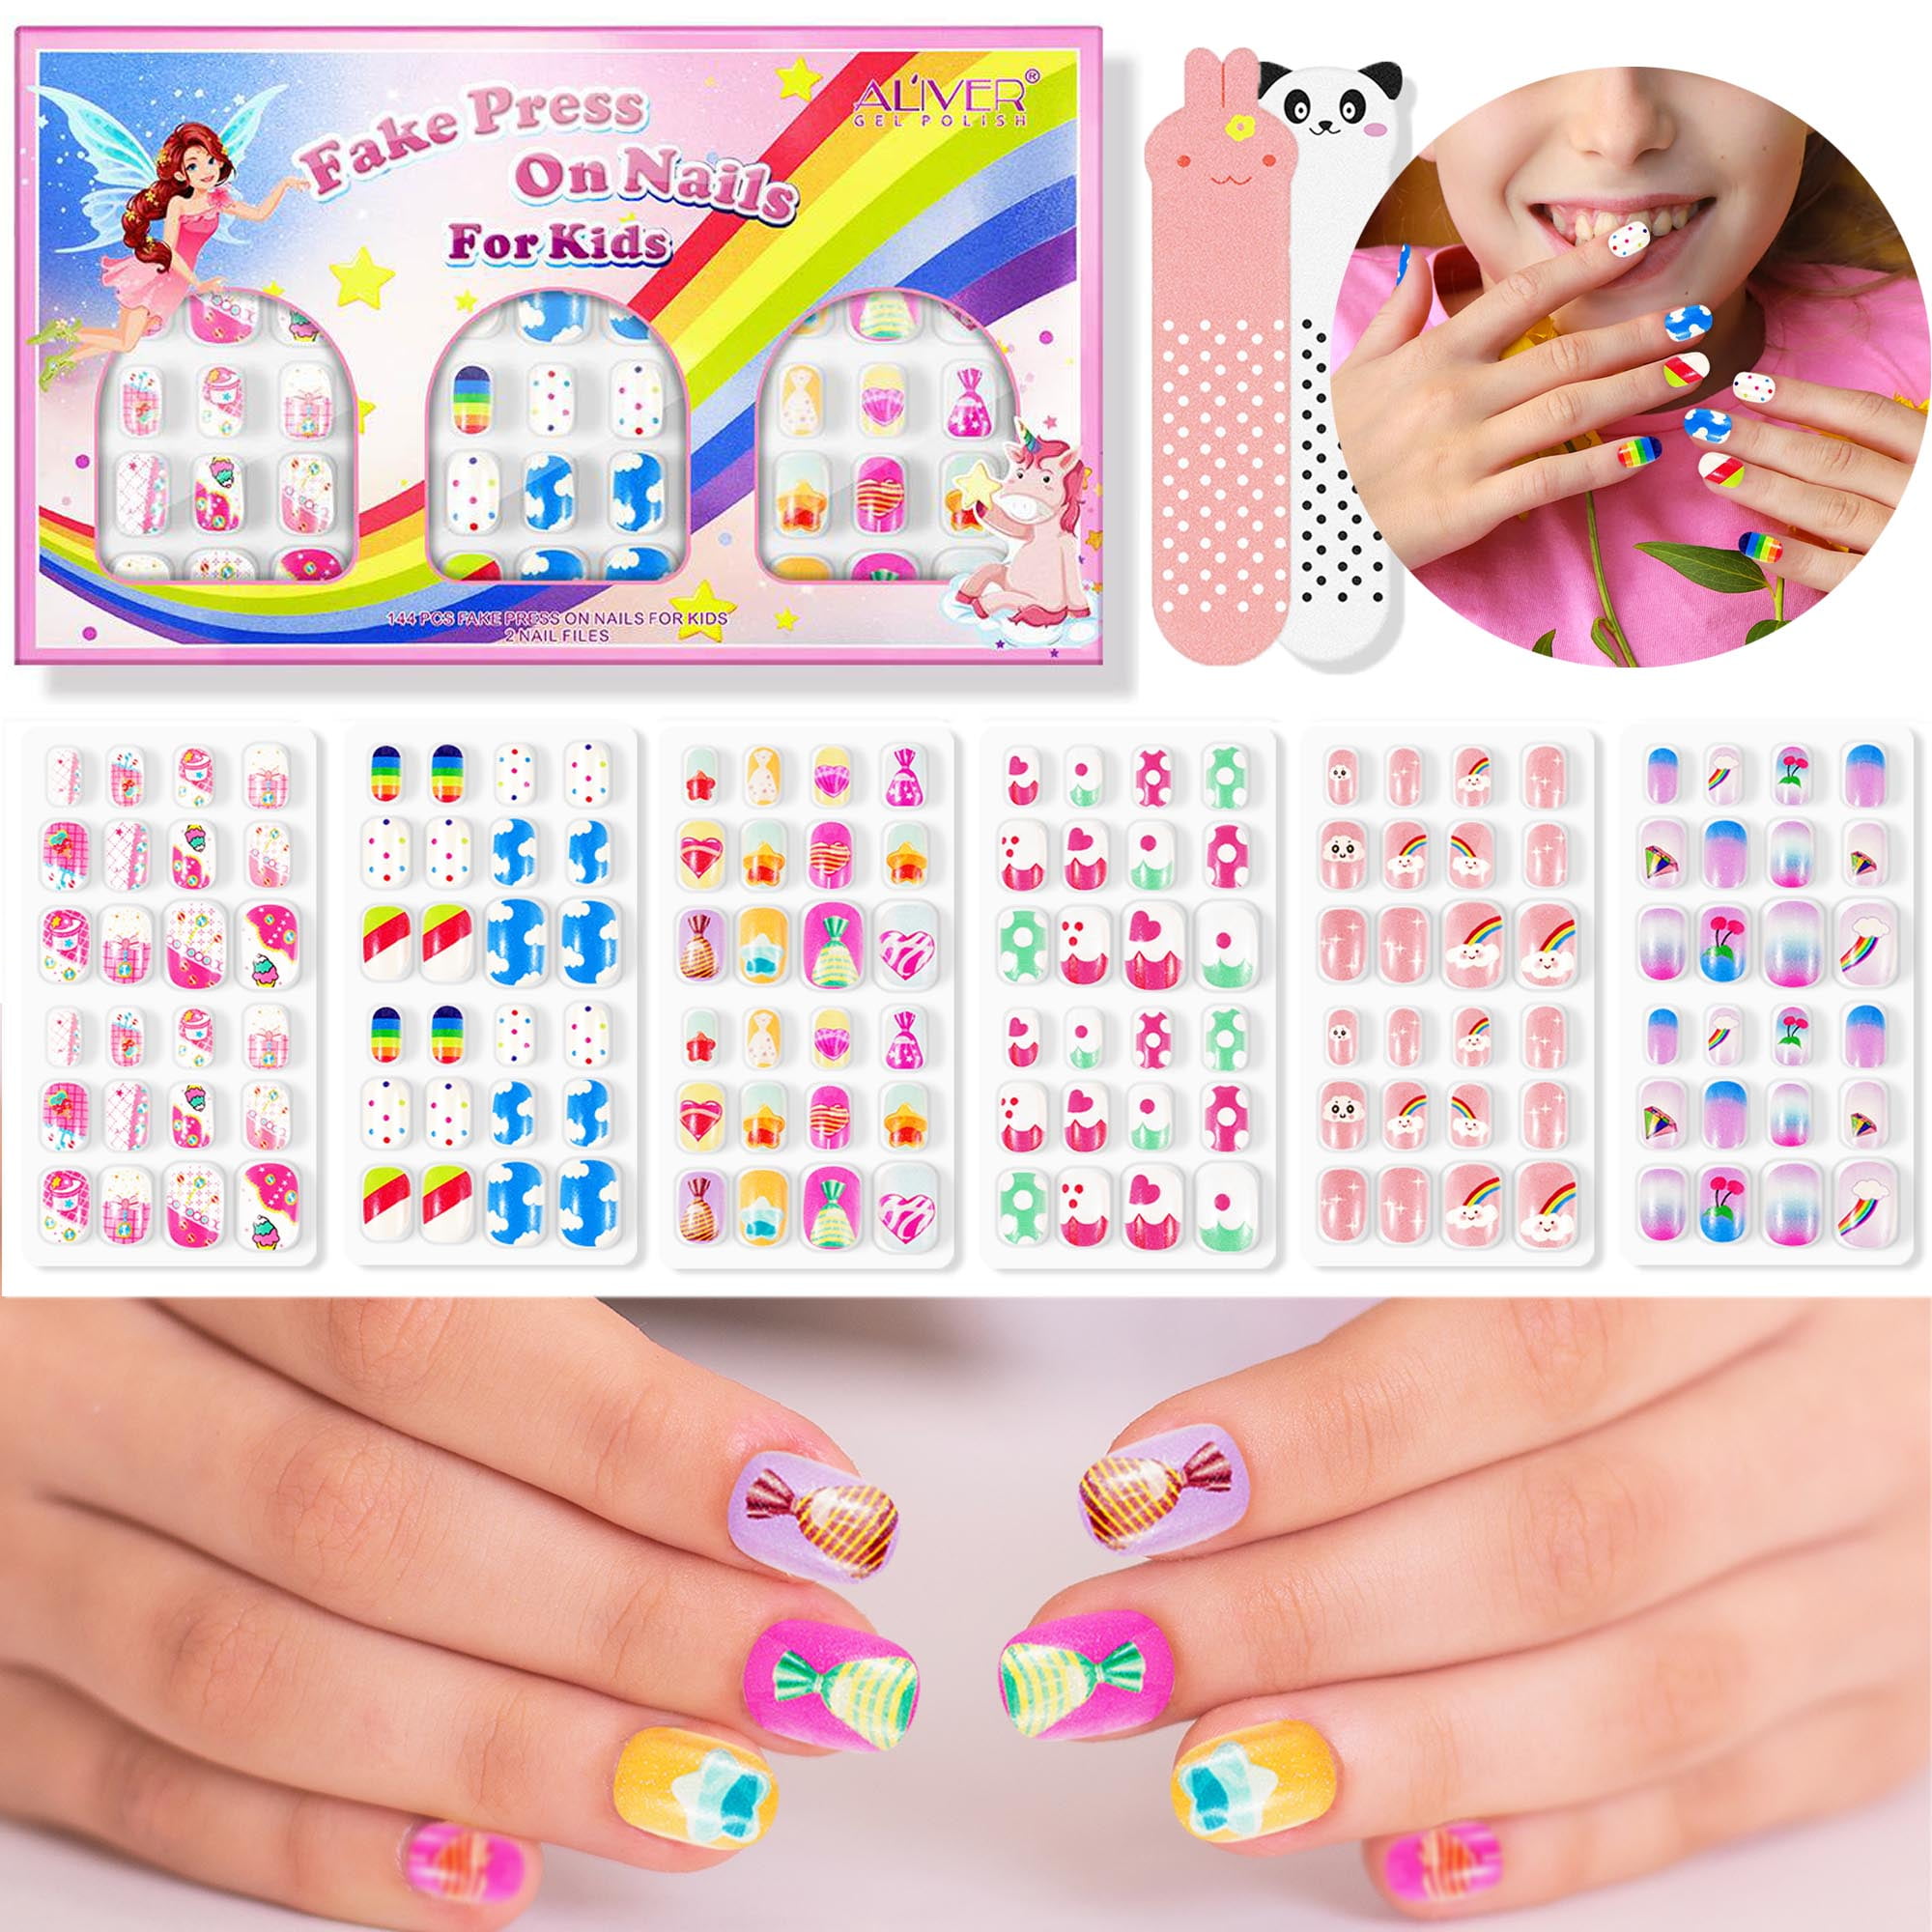 The amazing fake nails for kids and adults. They are awesome fake nalis. |  Nails for kids, Kids nail designs, Fake nails for kids